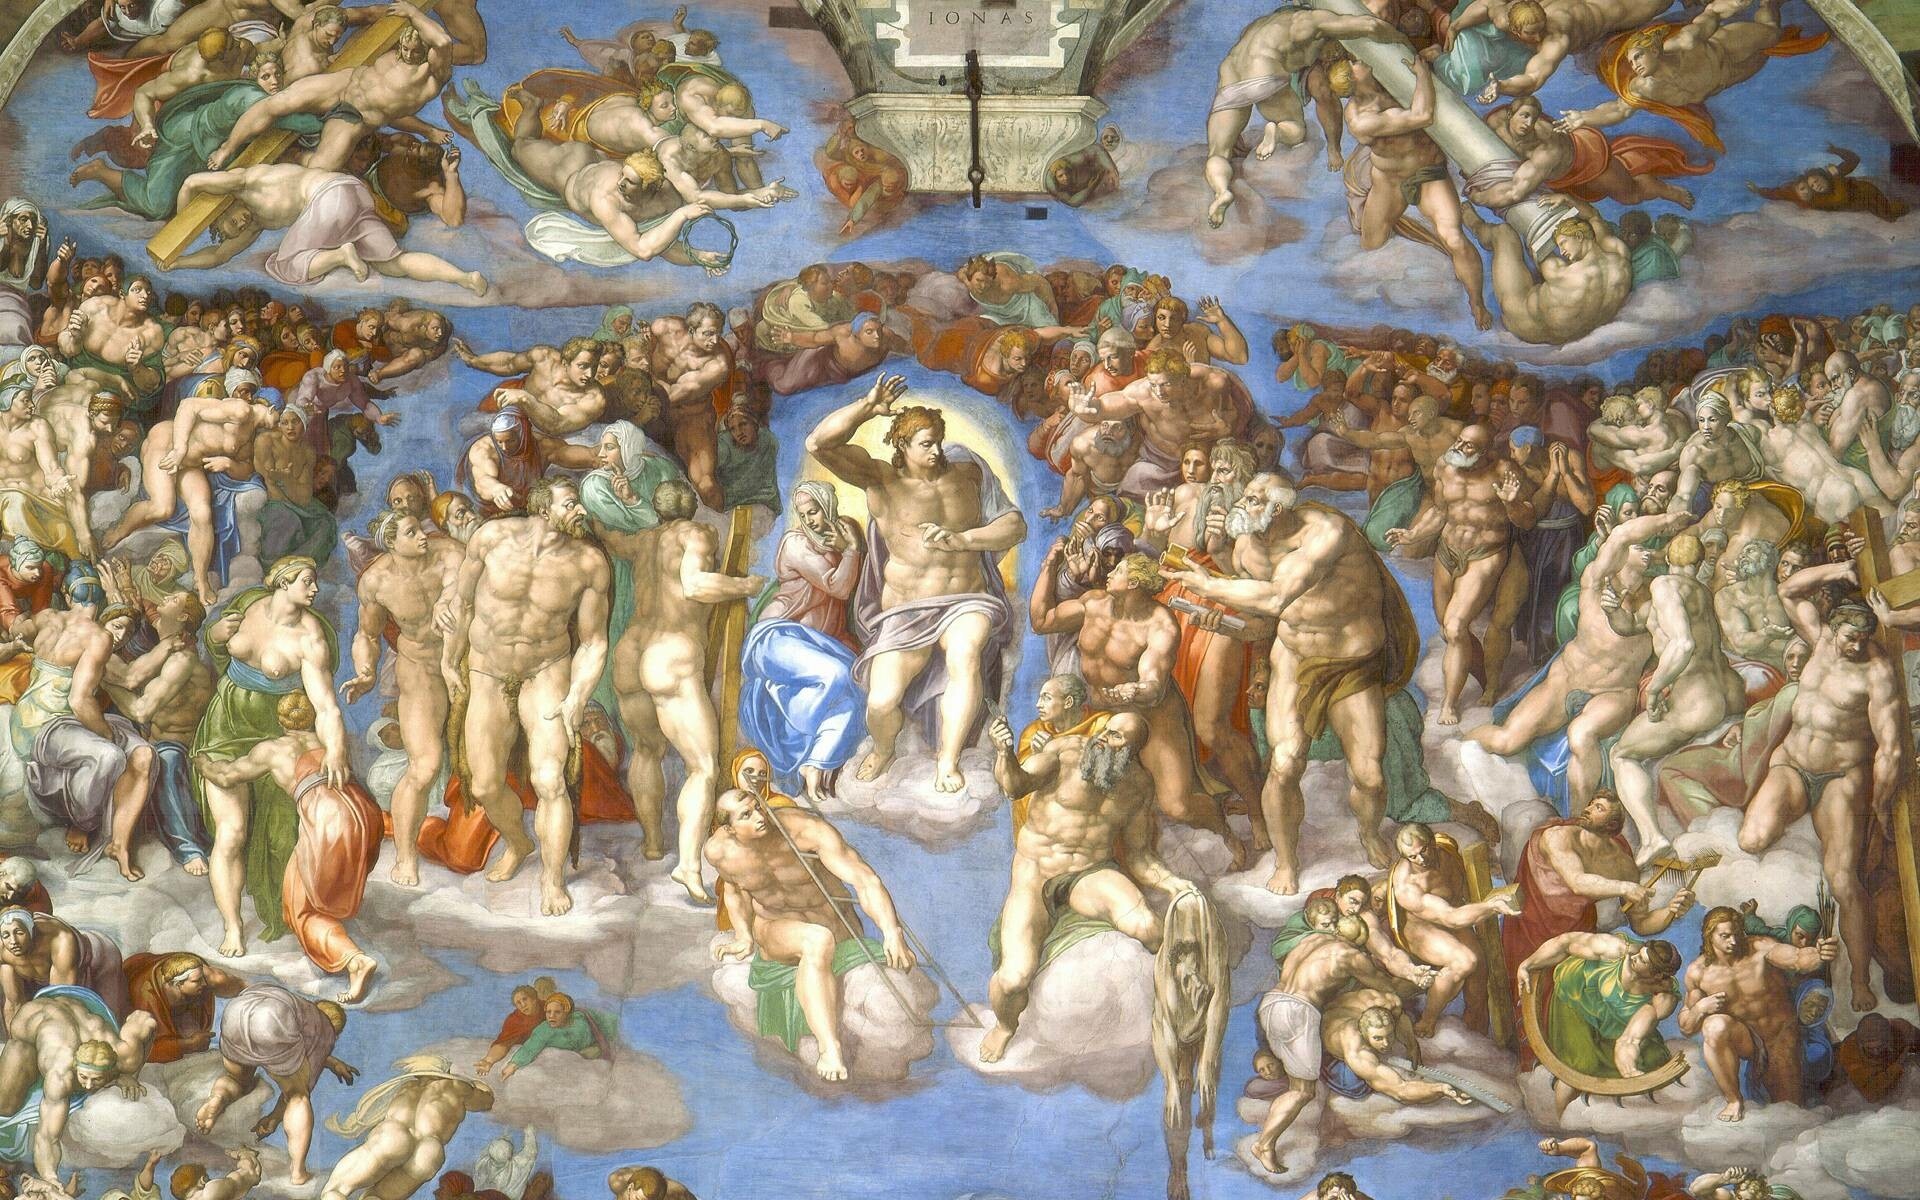 Michelangelo, Paintings, PC and mobile, Free download, 1920x1200 HD Desktop